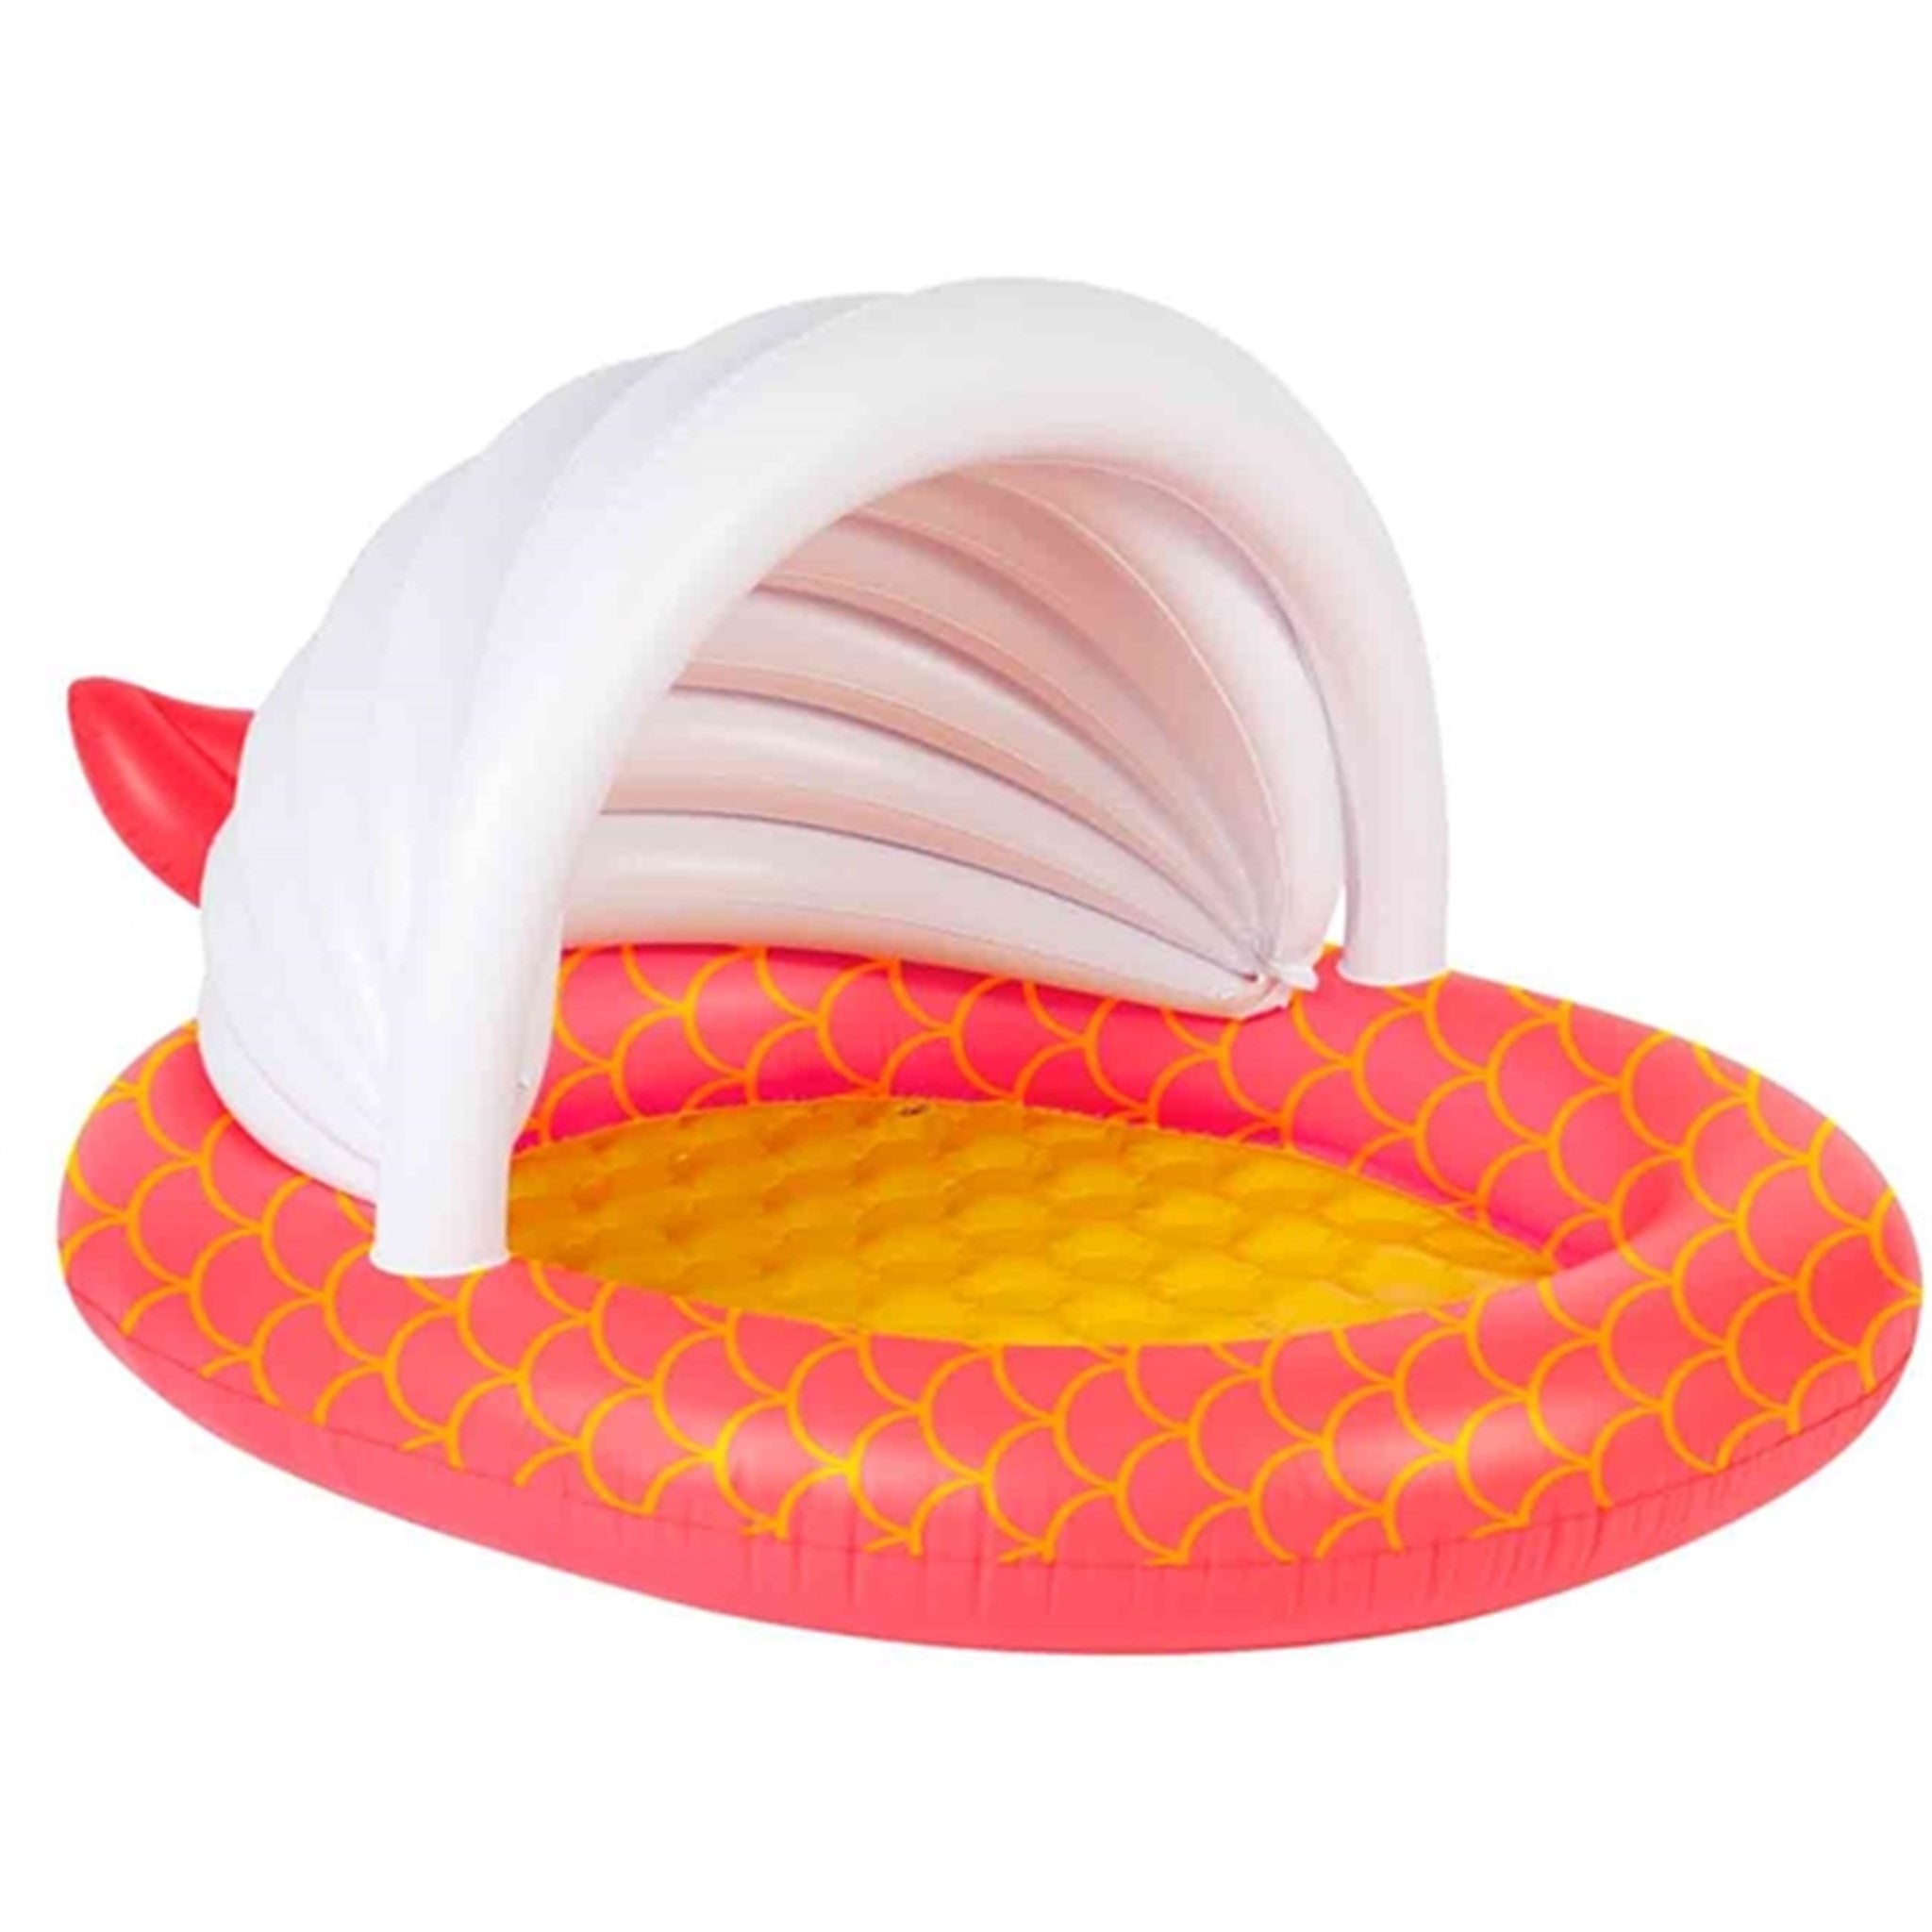 SunnyLife Kiddy Inflatable Pool Mermaid Magique